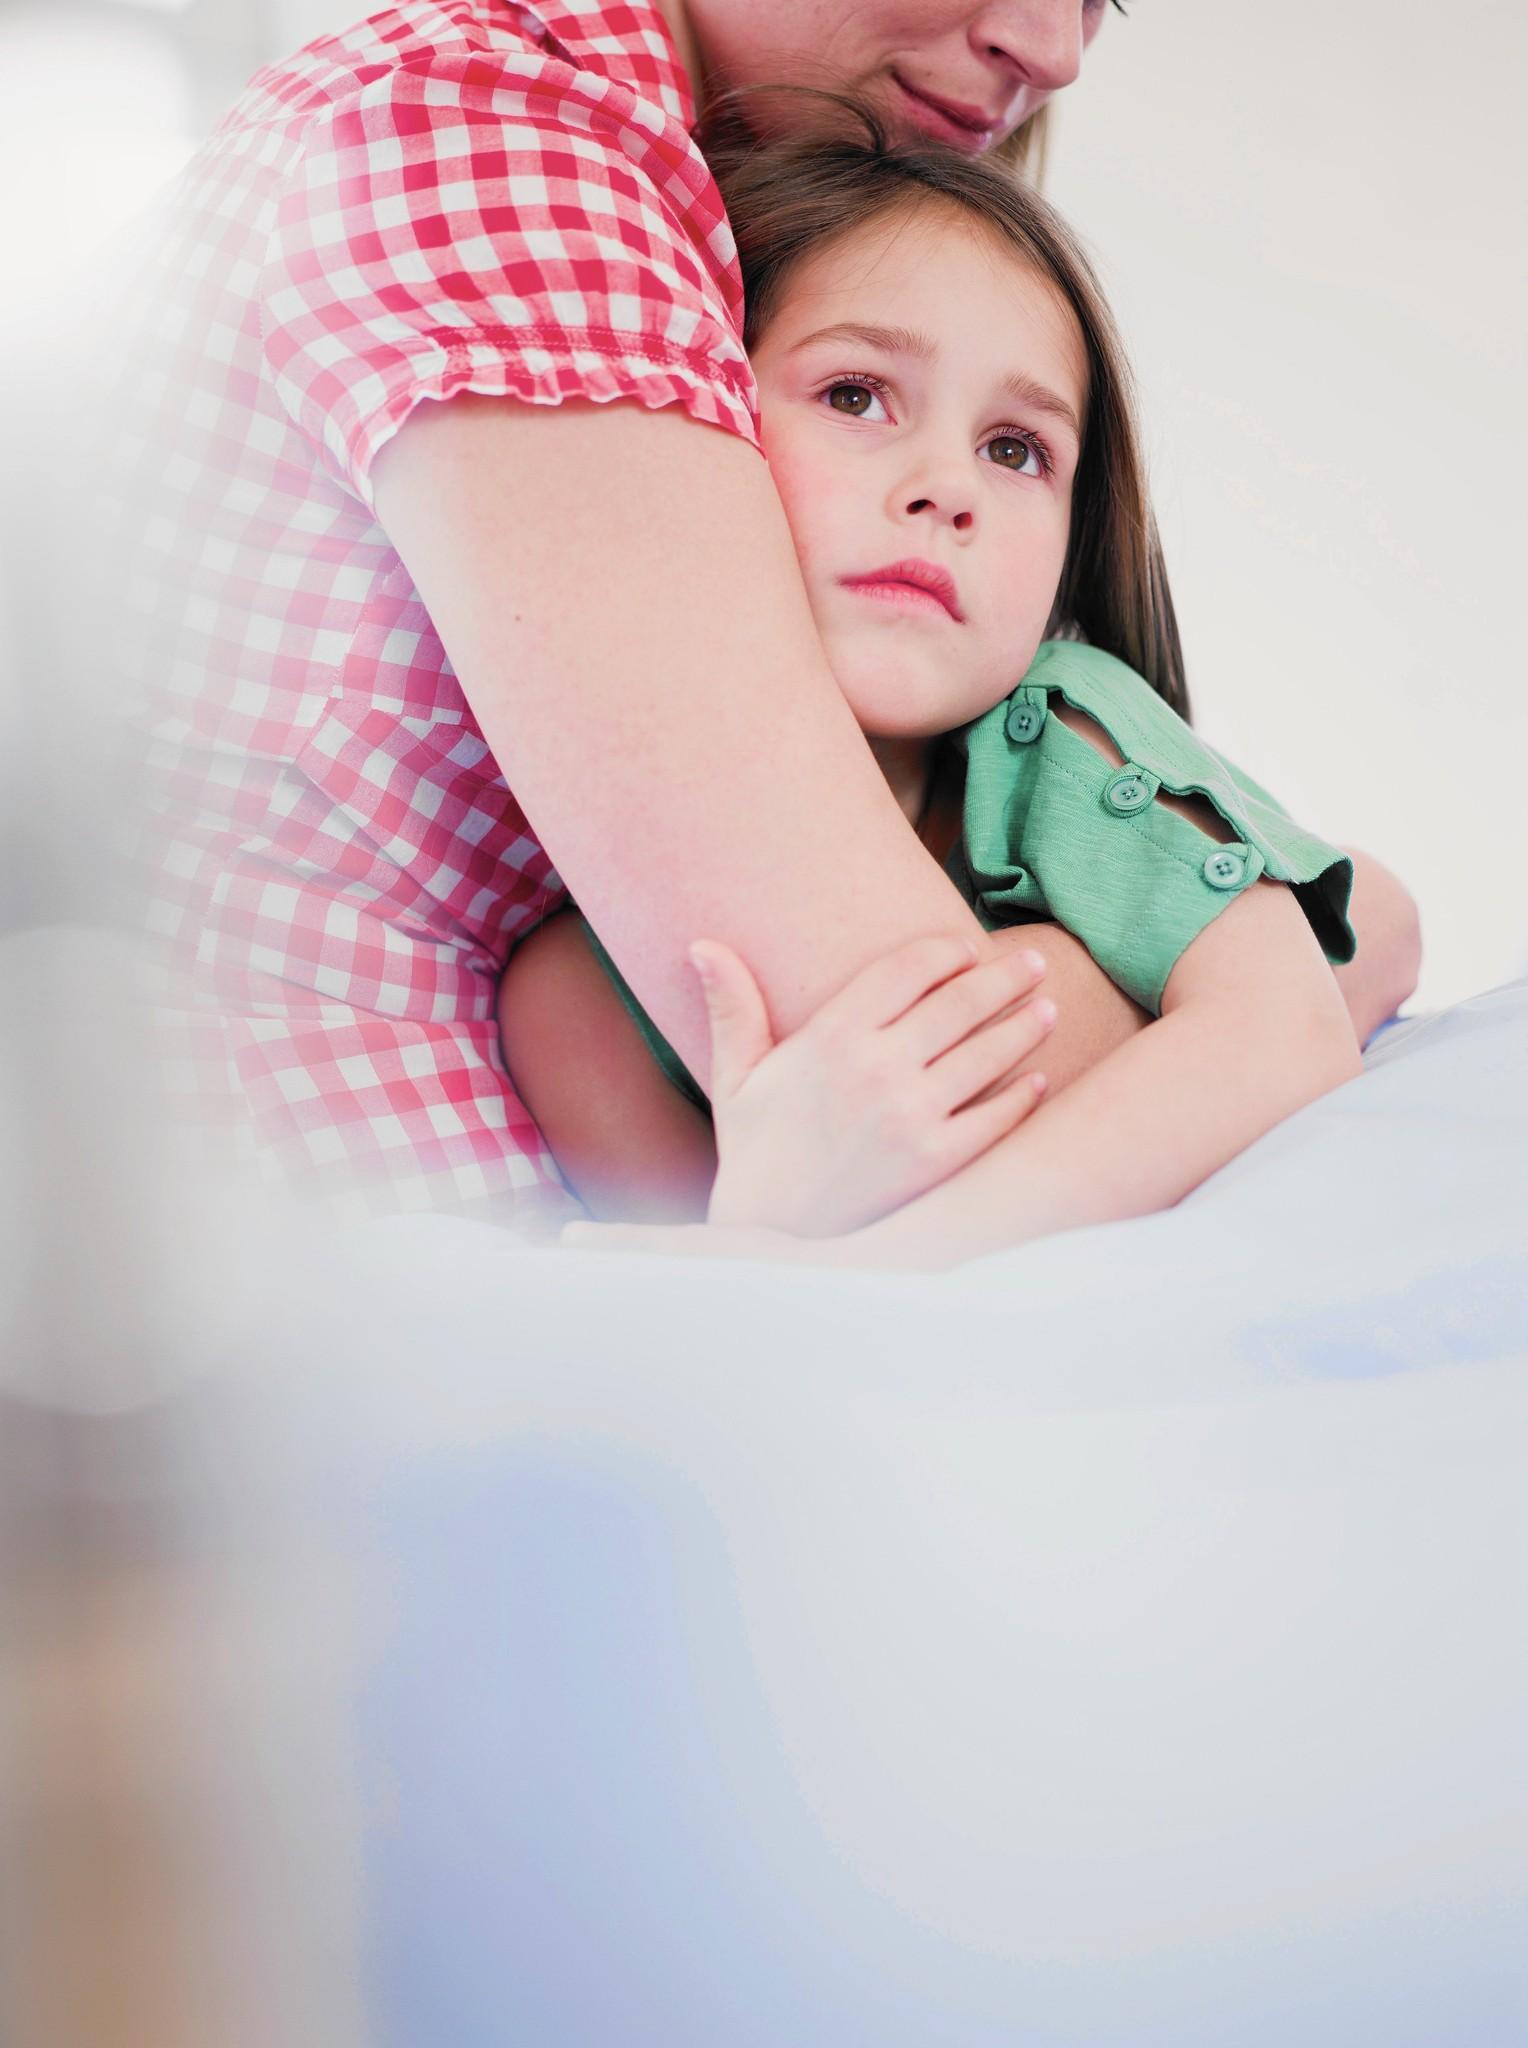 Are your kids inheriting your fears? What parents can do ...